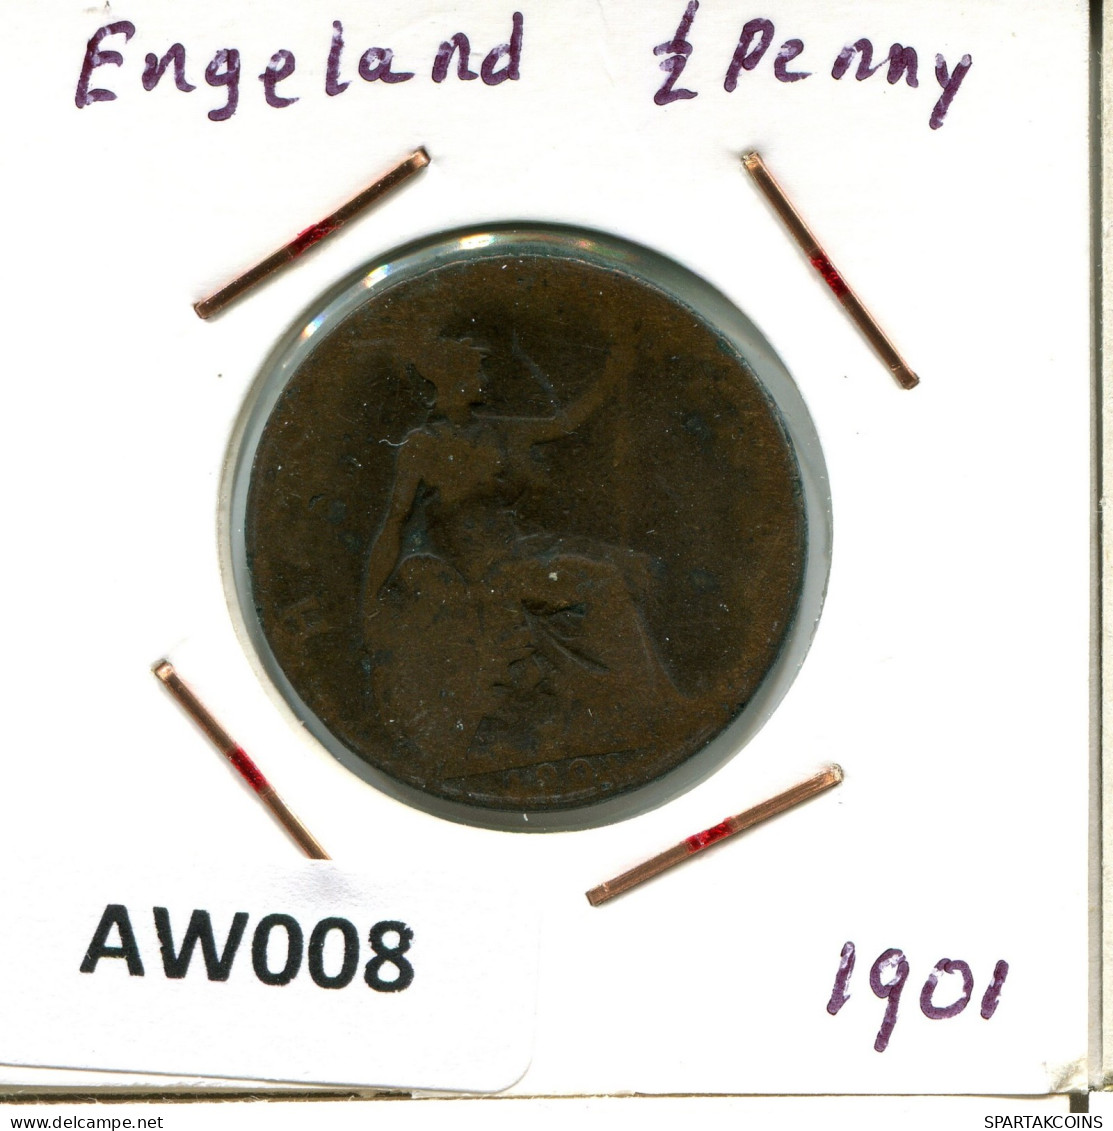 HALF PENNY 1901 UK GREAT BRITAIN Coin #AW008.U.A - C. 1/2 Penny